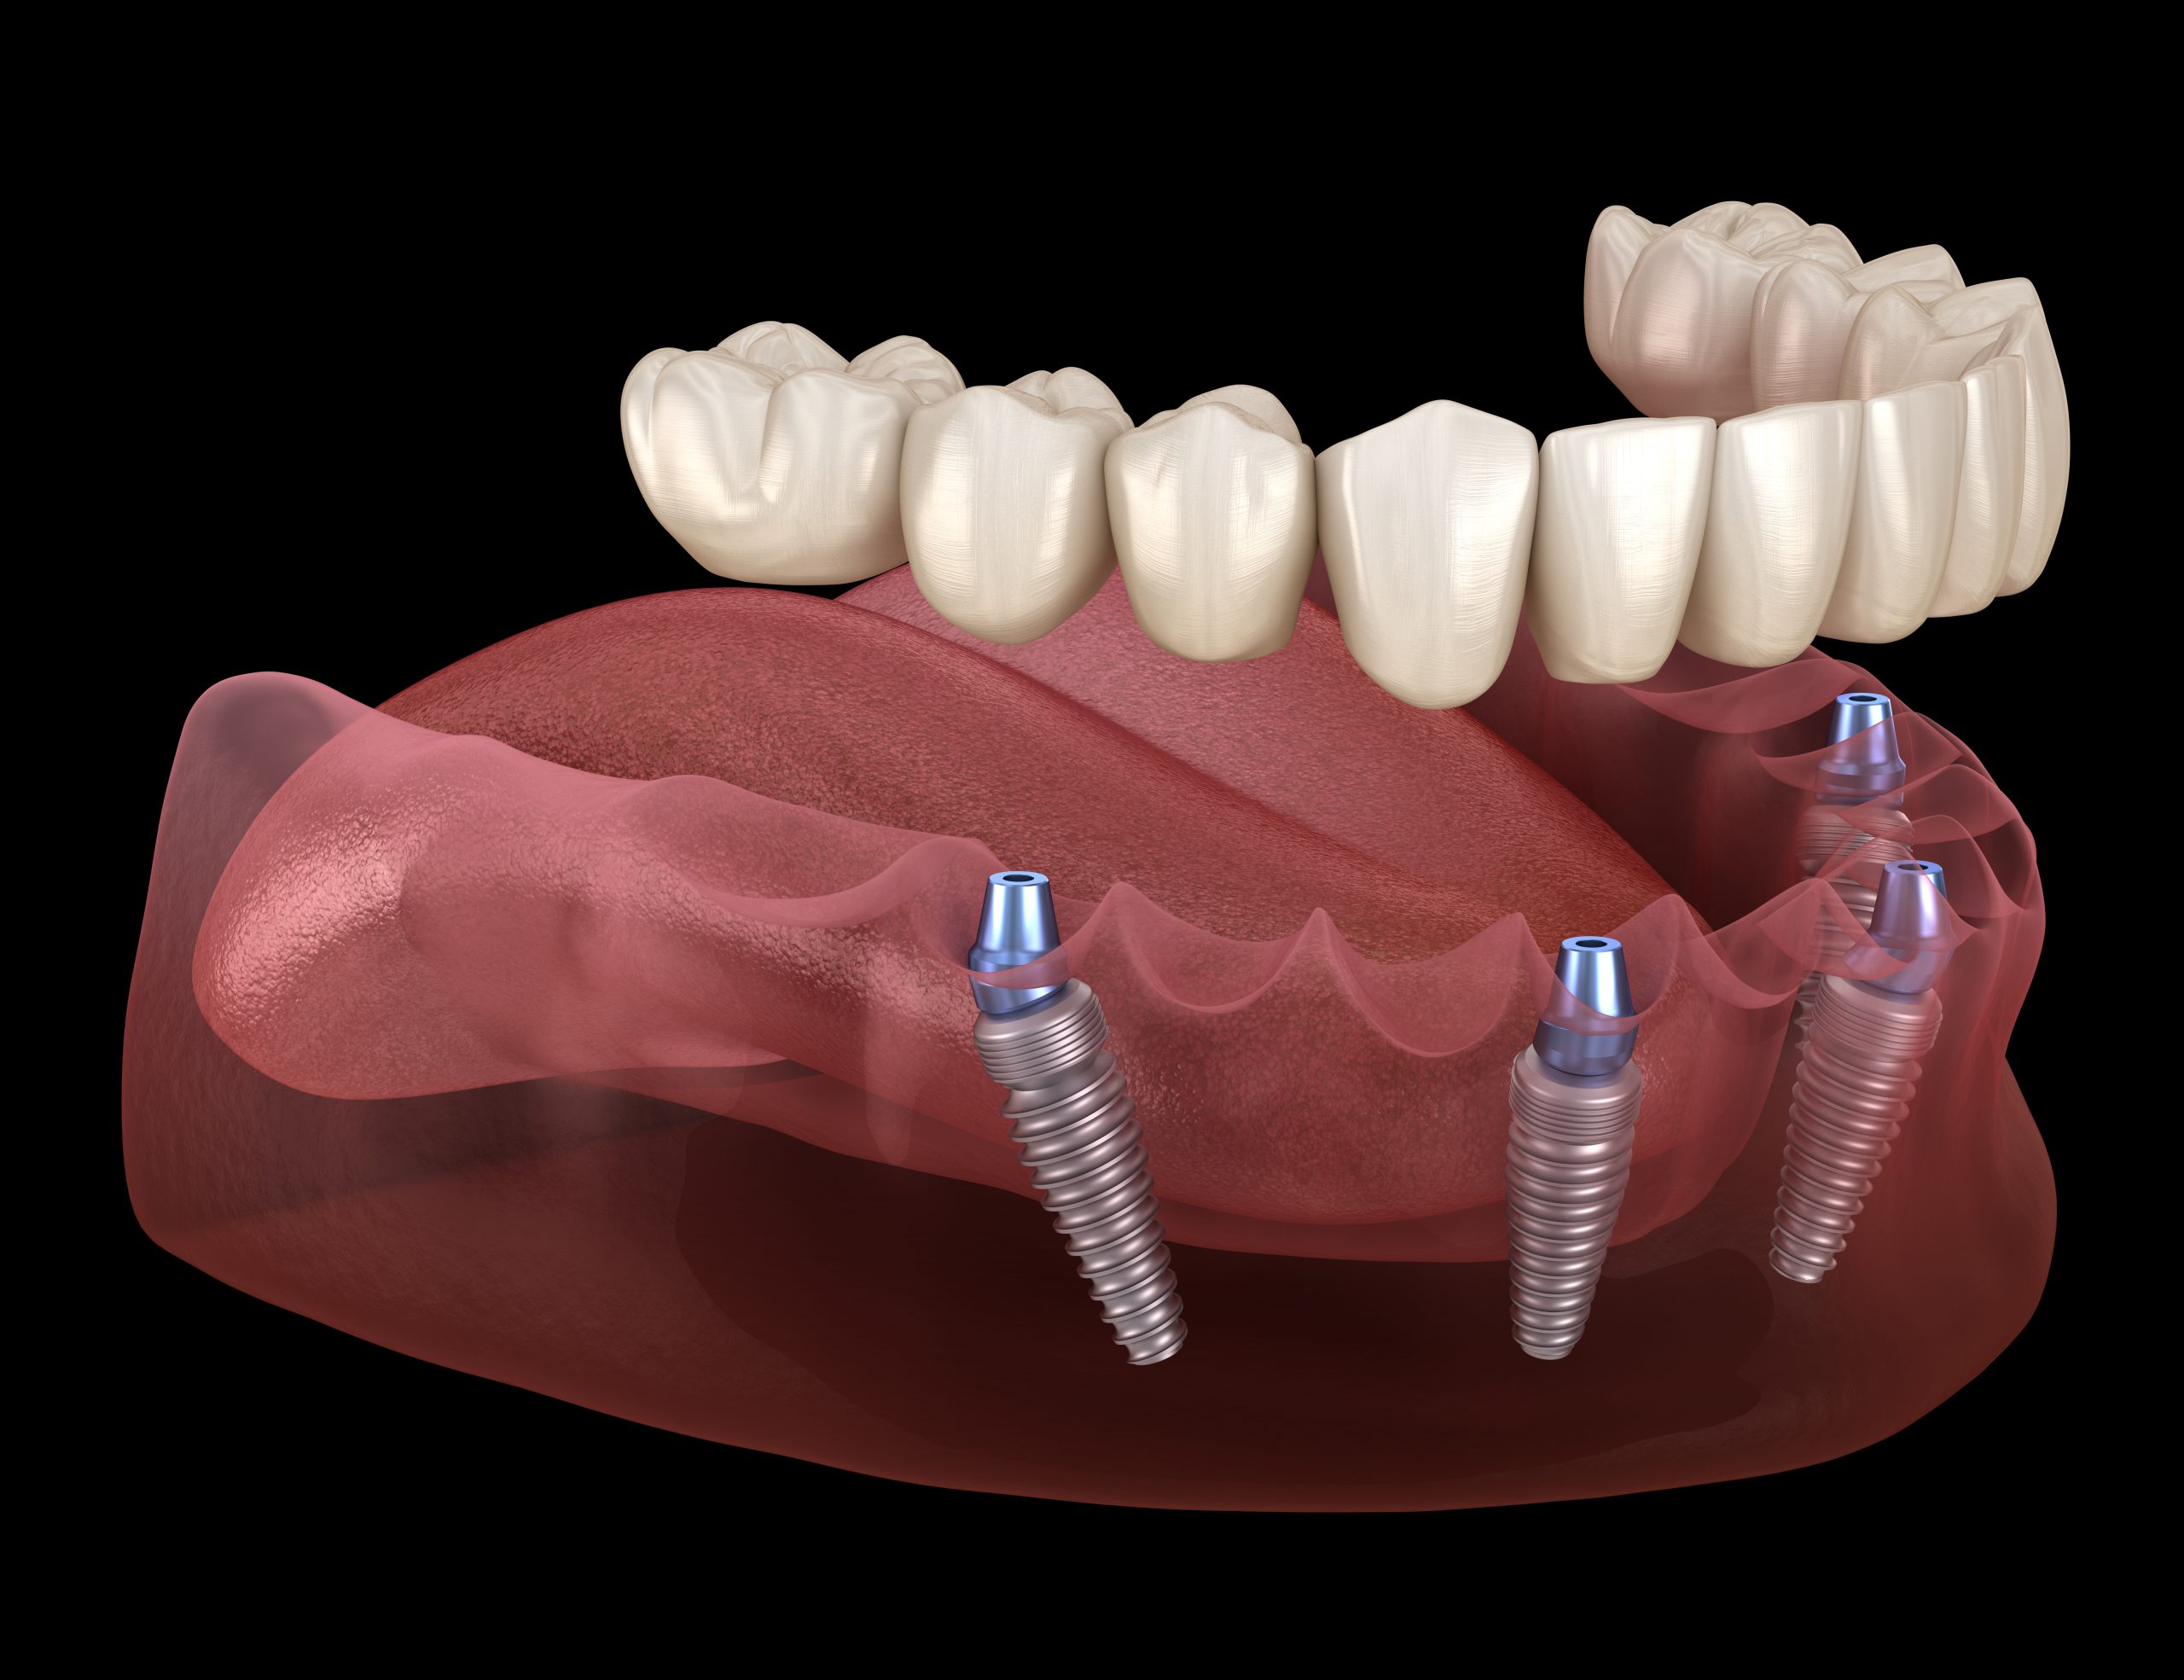 Dental Implants Are Truly Life-Changing